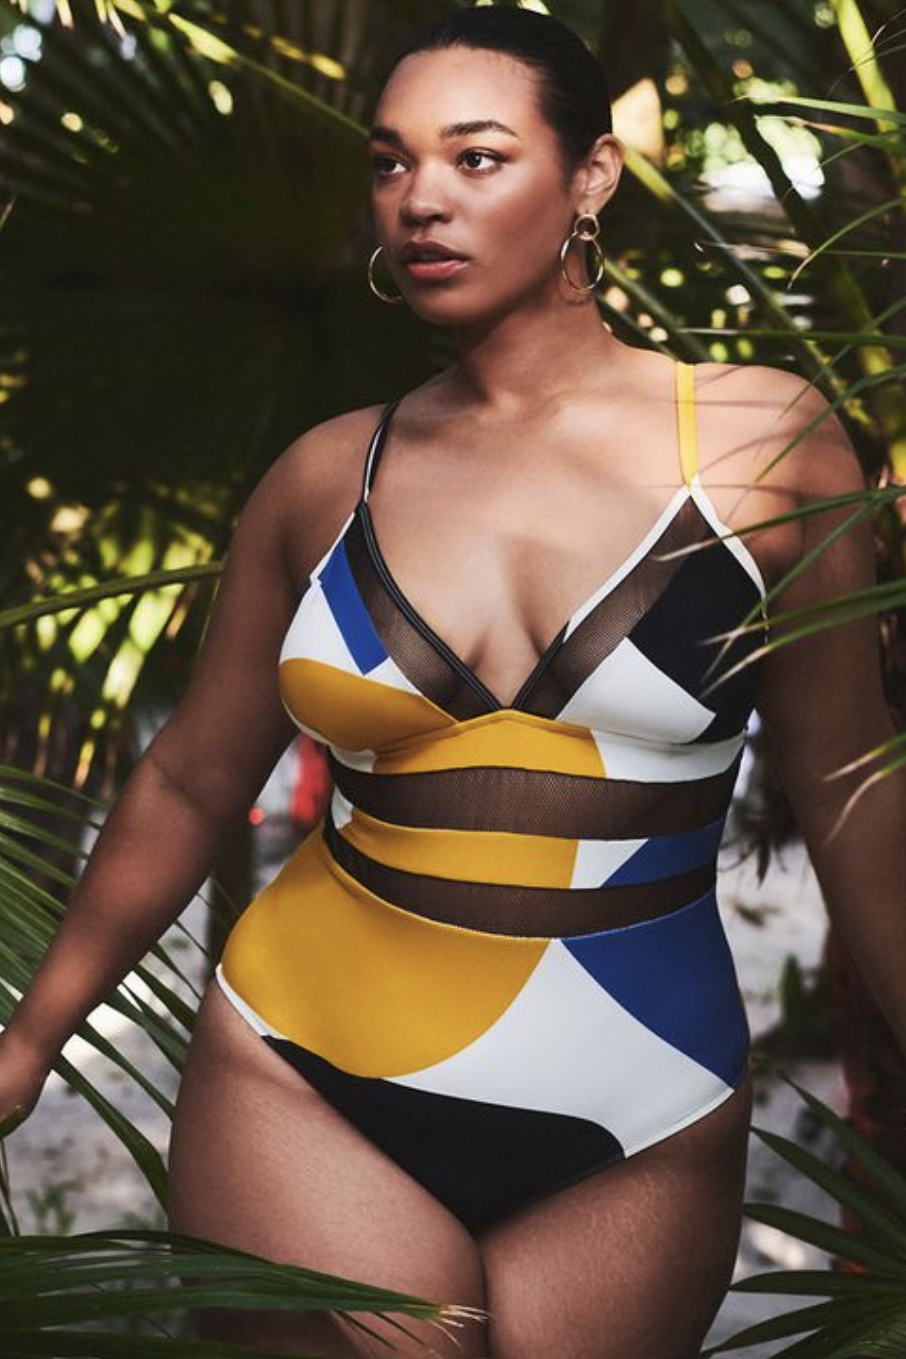 Fugtighed åbning Kæmpe stor 26 Best Plus-Size Bathing Suits and Swimwear for 2023